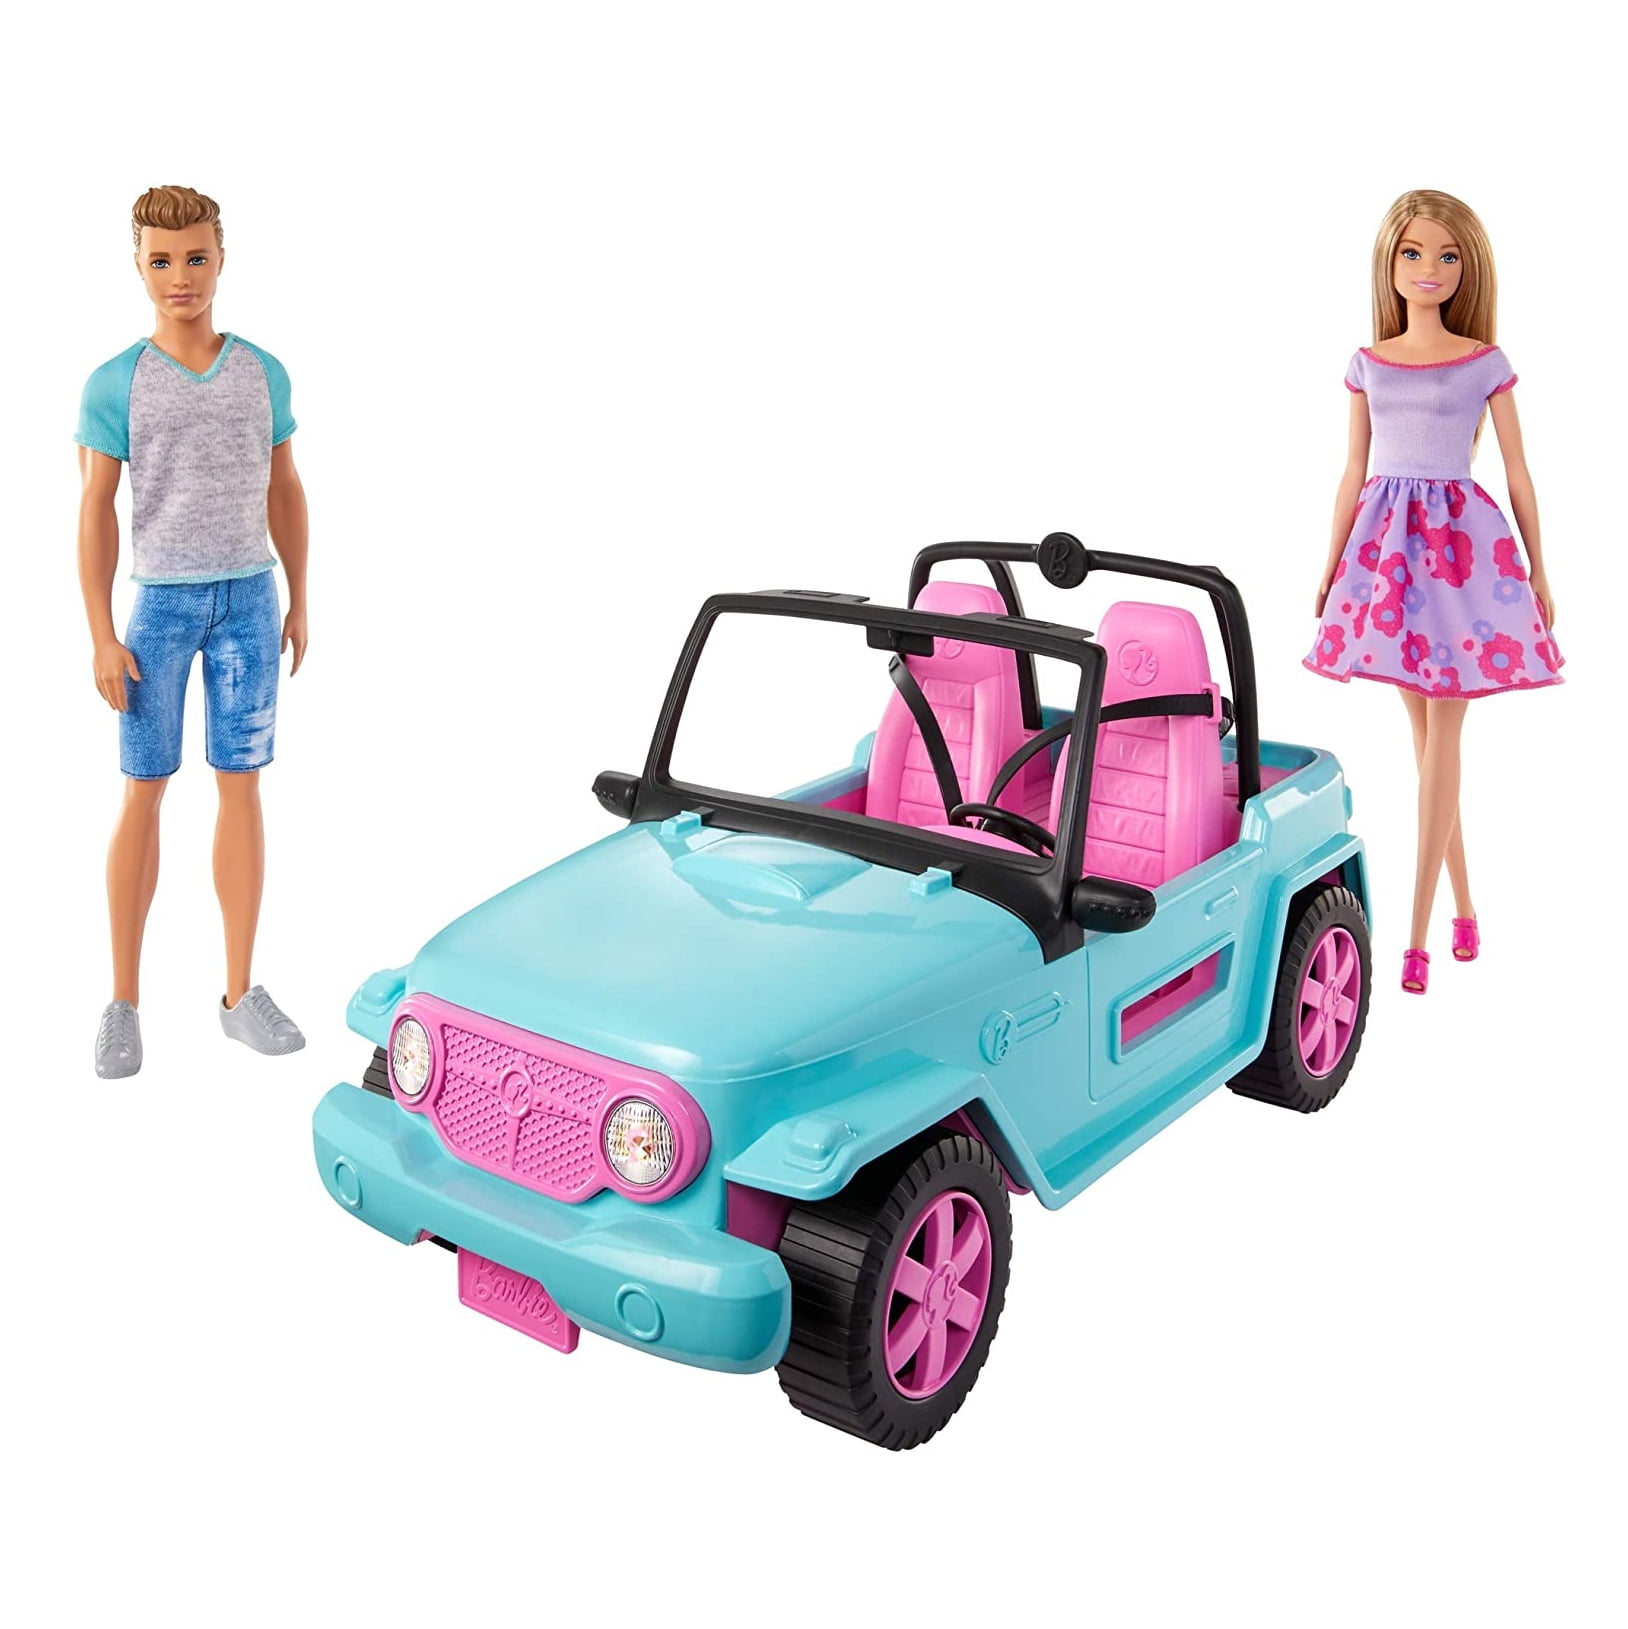 Barbie Doll and Playset with Off-Road Outfits, and Accessories Walmart.com